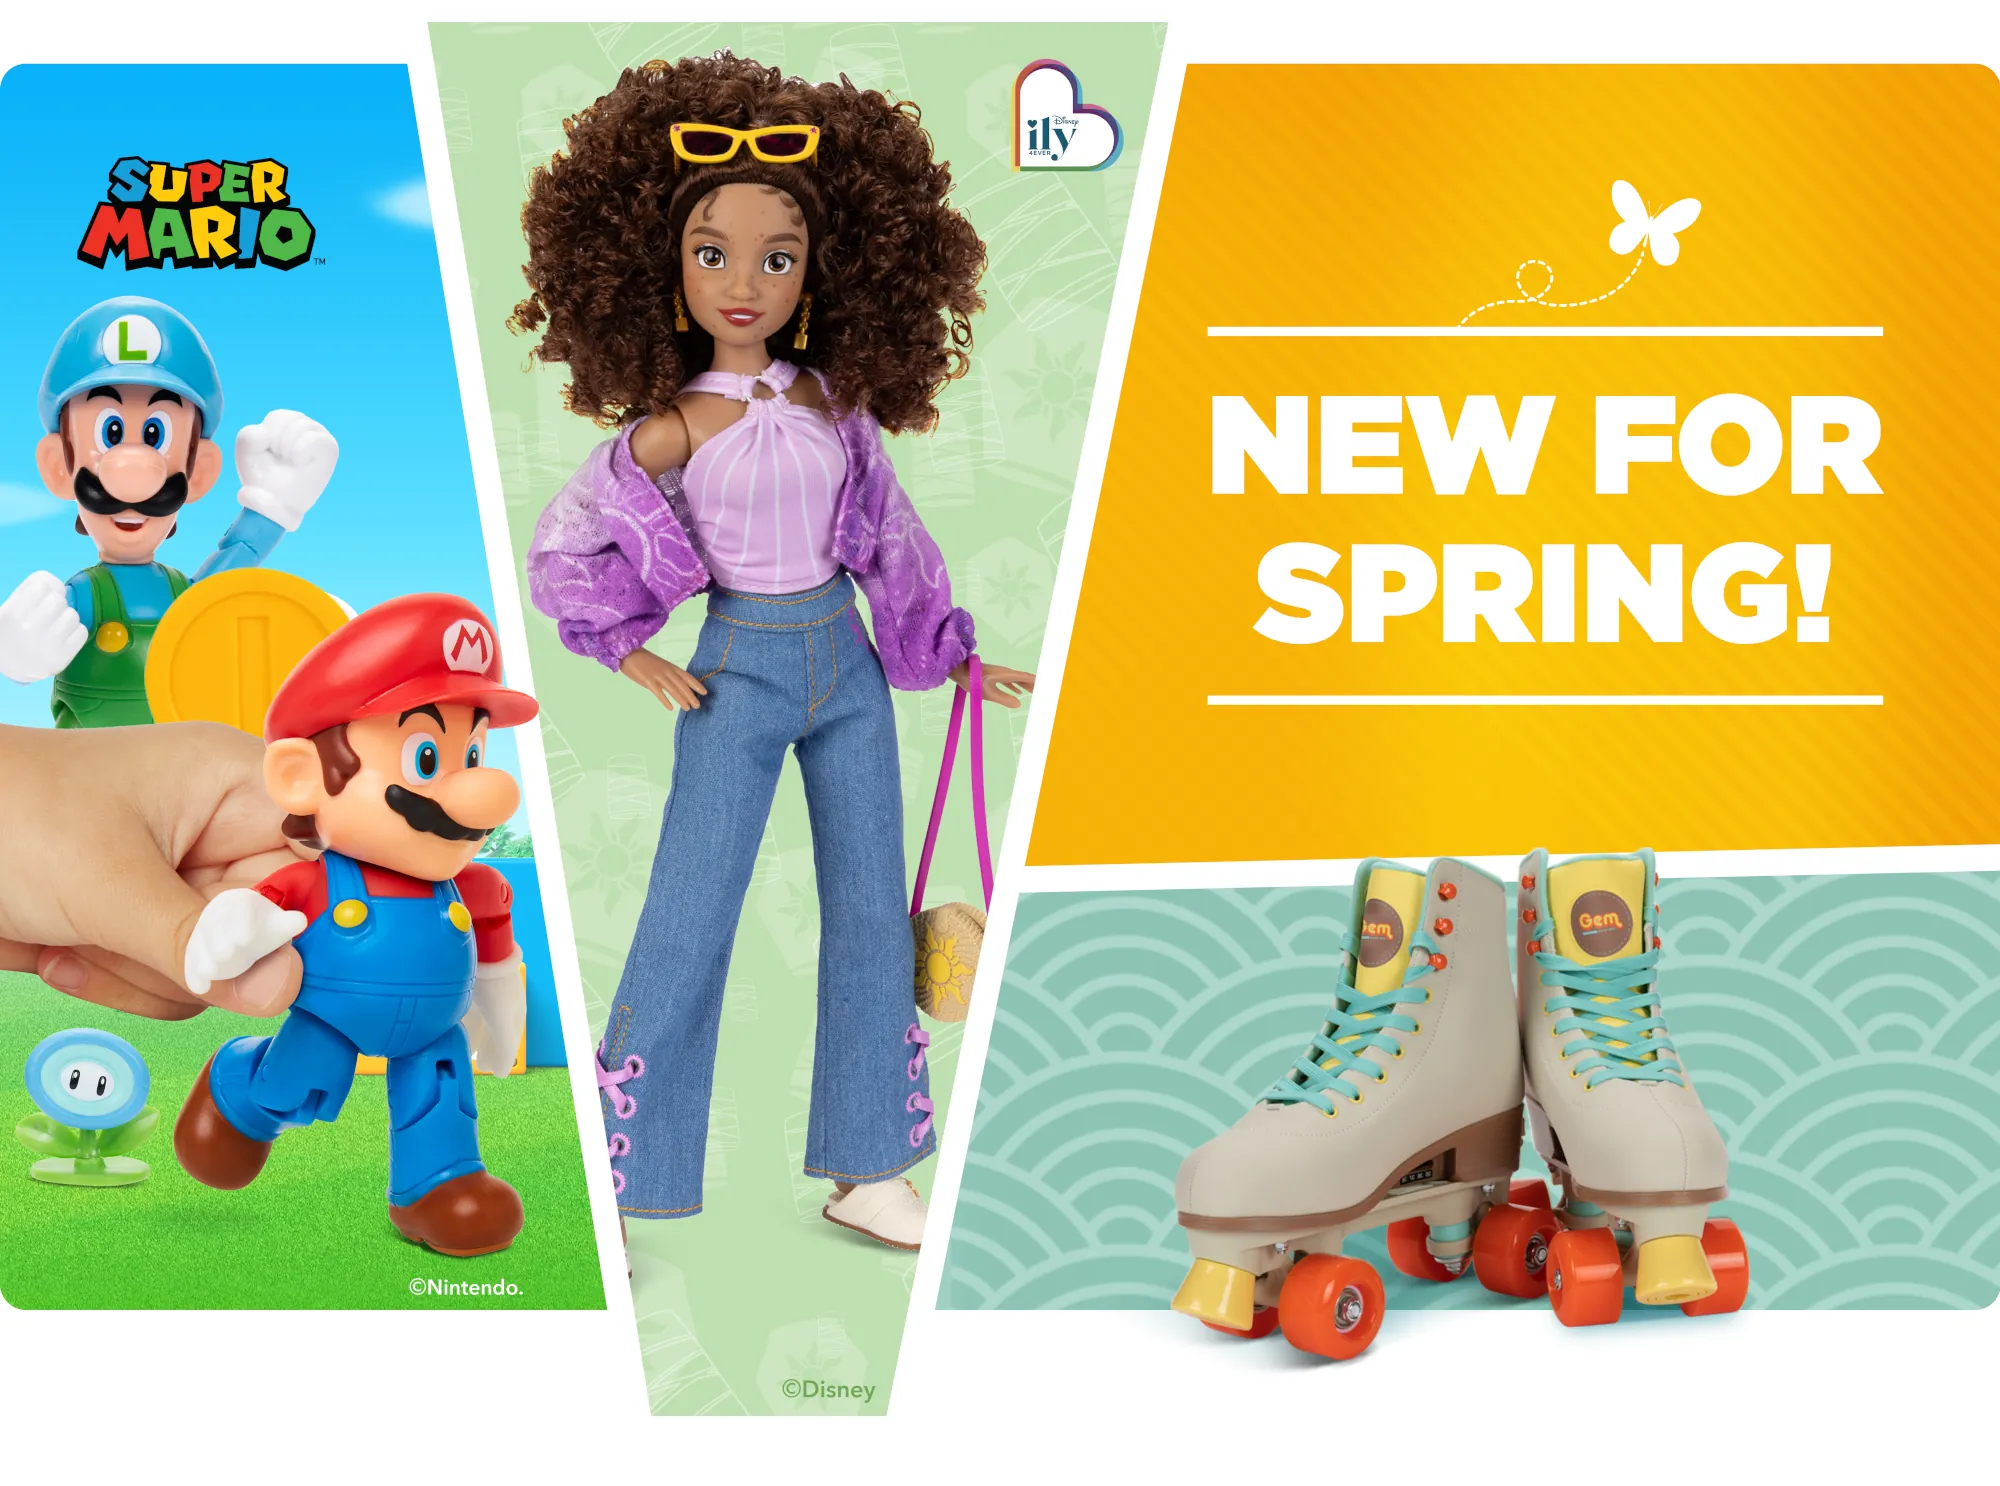 A banner reading "New for Spring" featuring Mario and Luigi, a pair of Gem Rollerskates, and a Disney ily4EVER fashion doll.